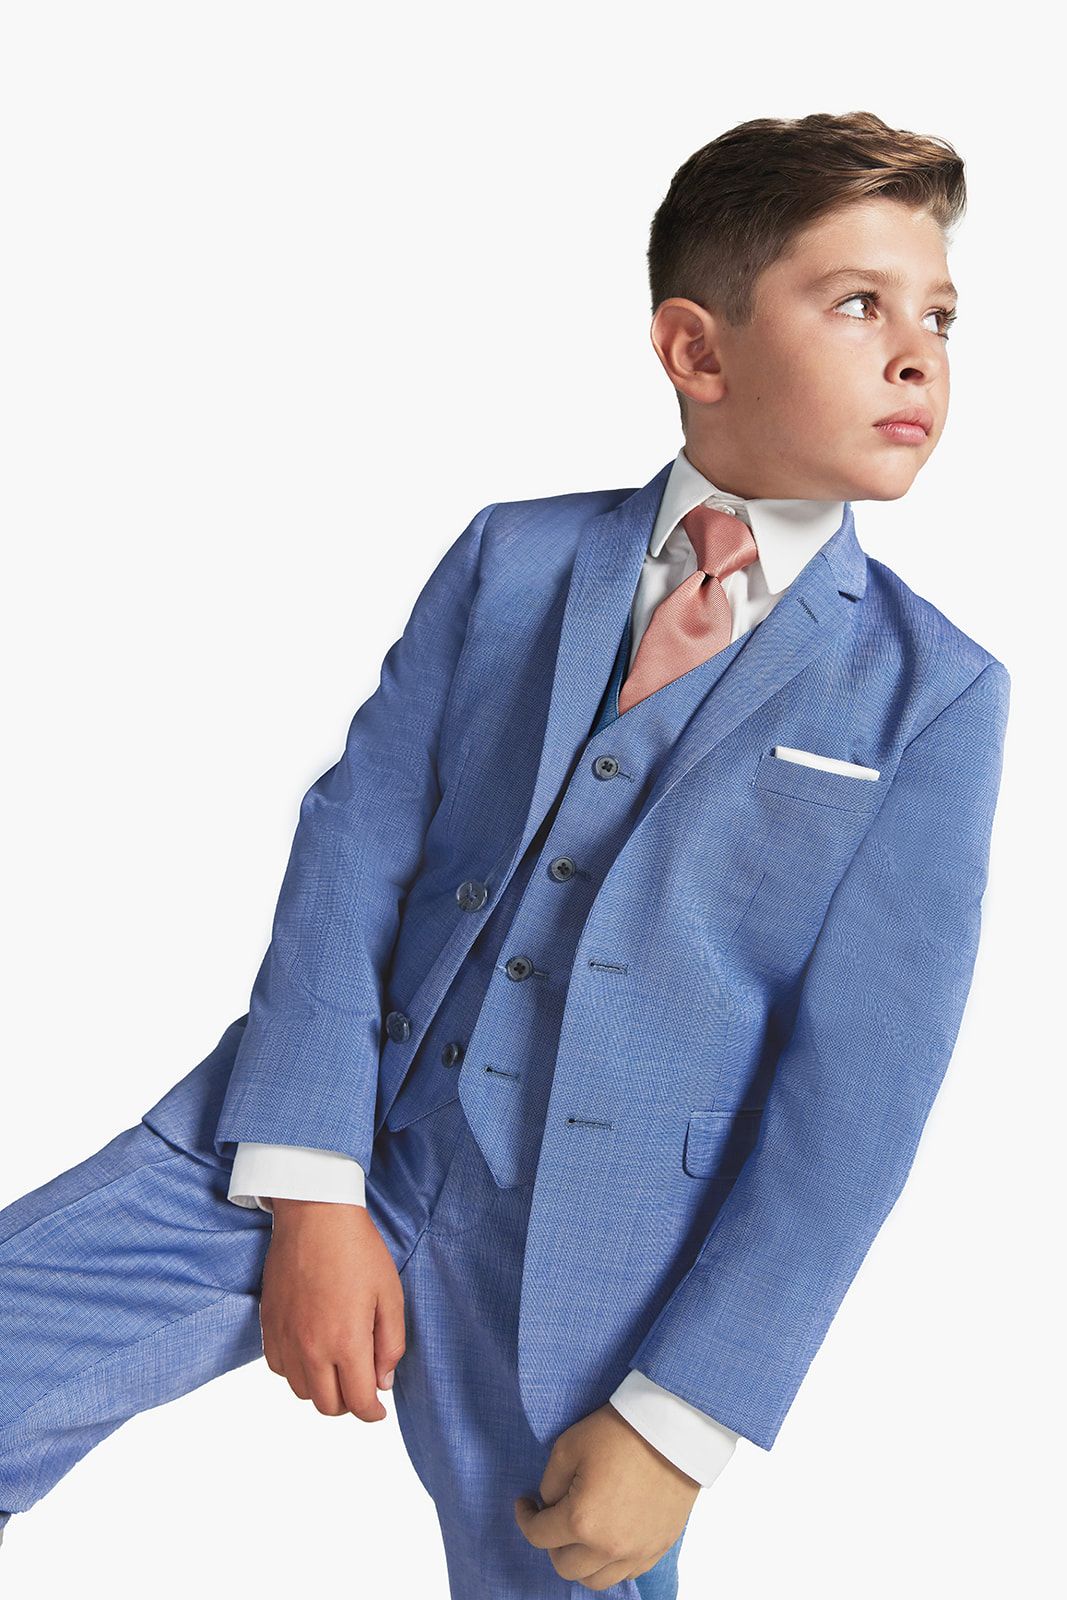 Postman Blue Suit for kids, boys, children, and teens